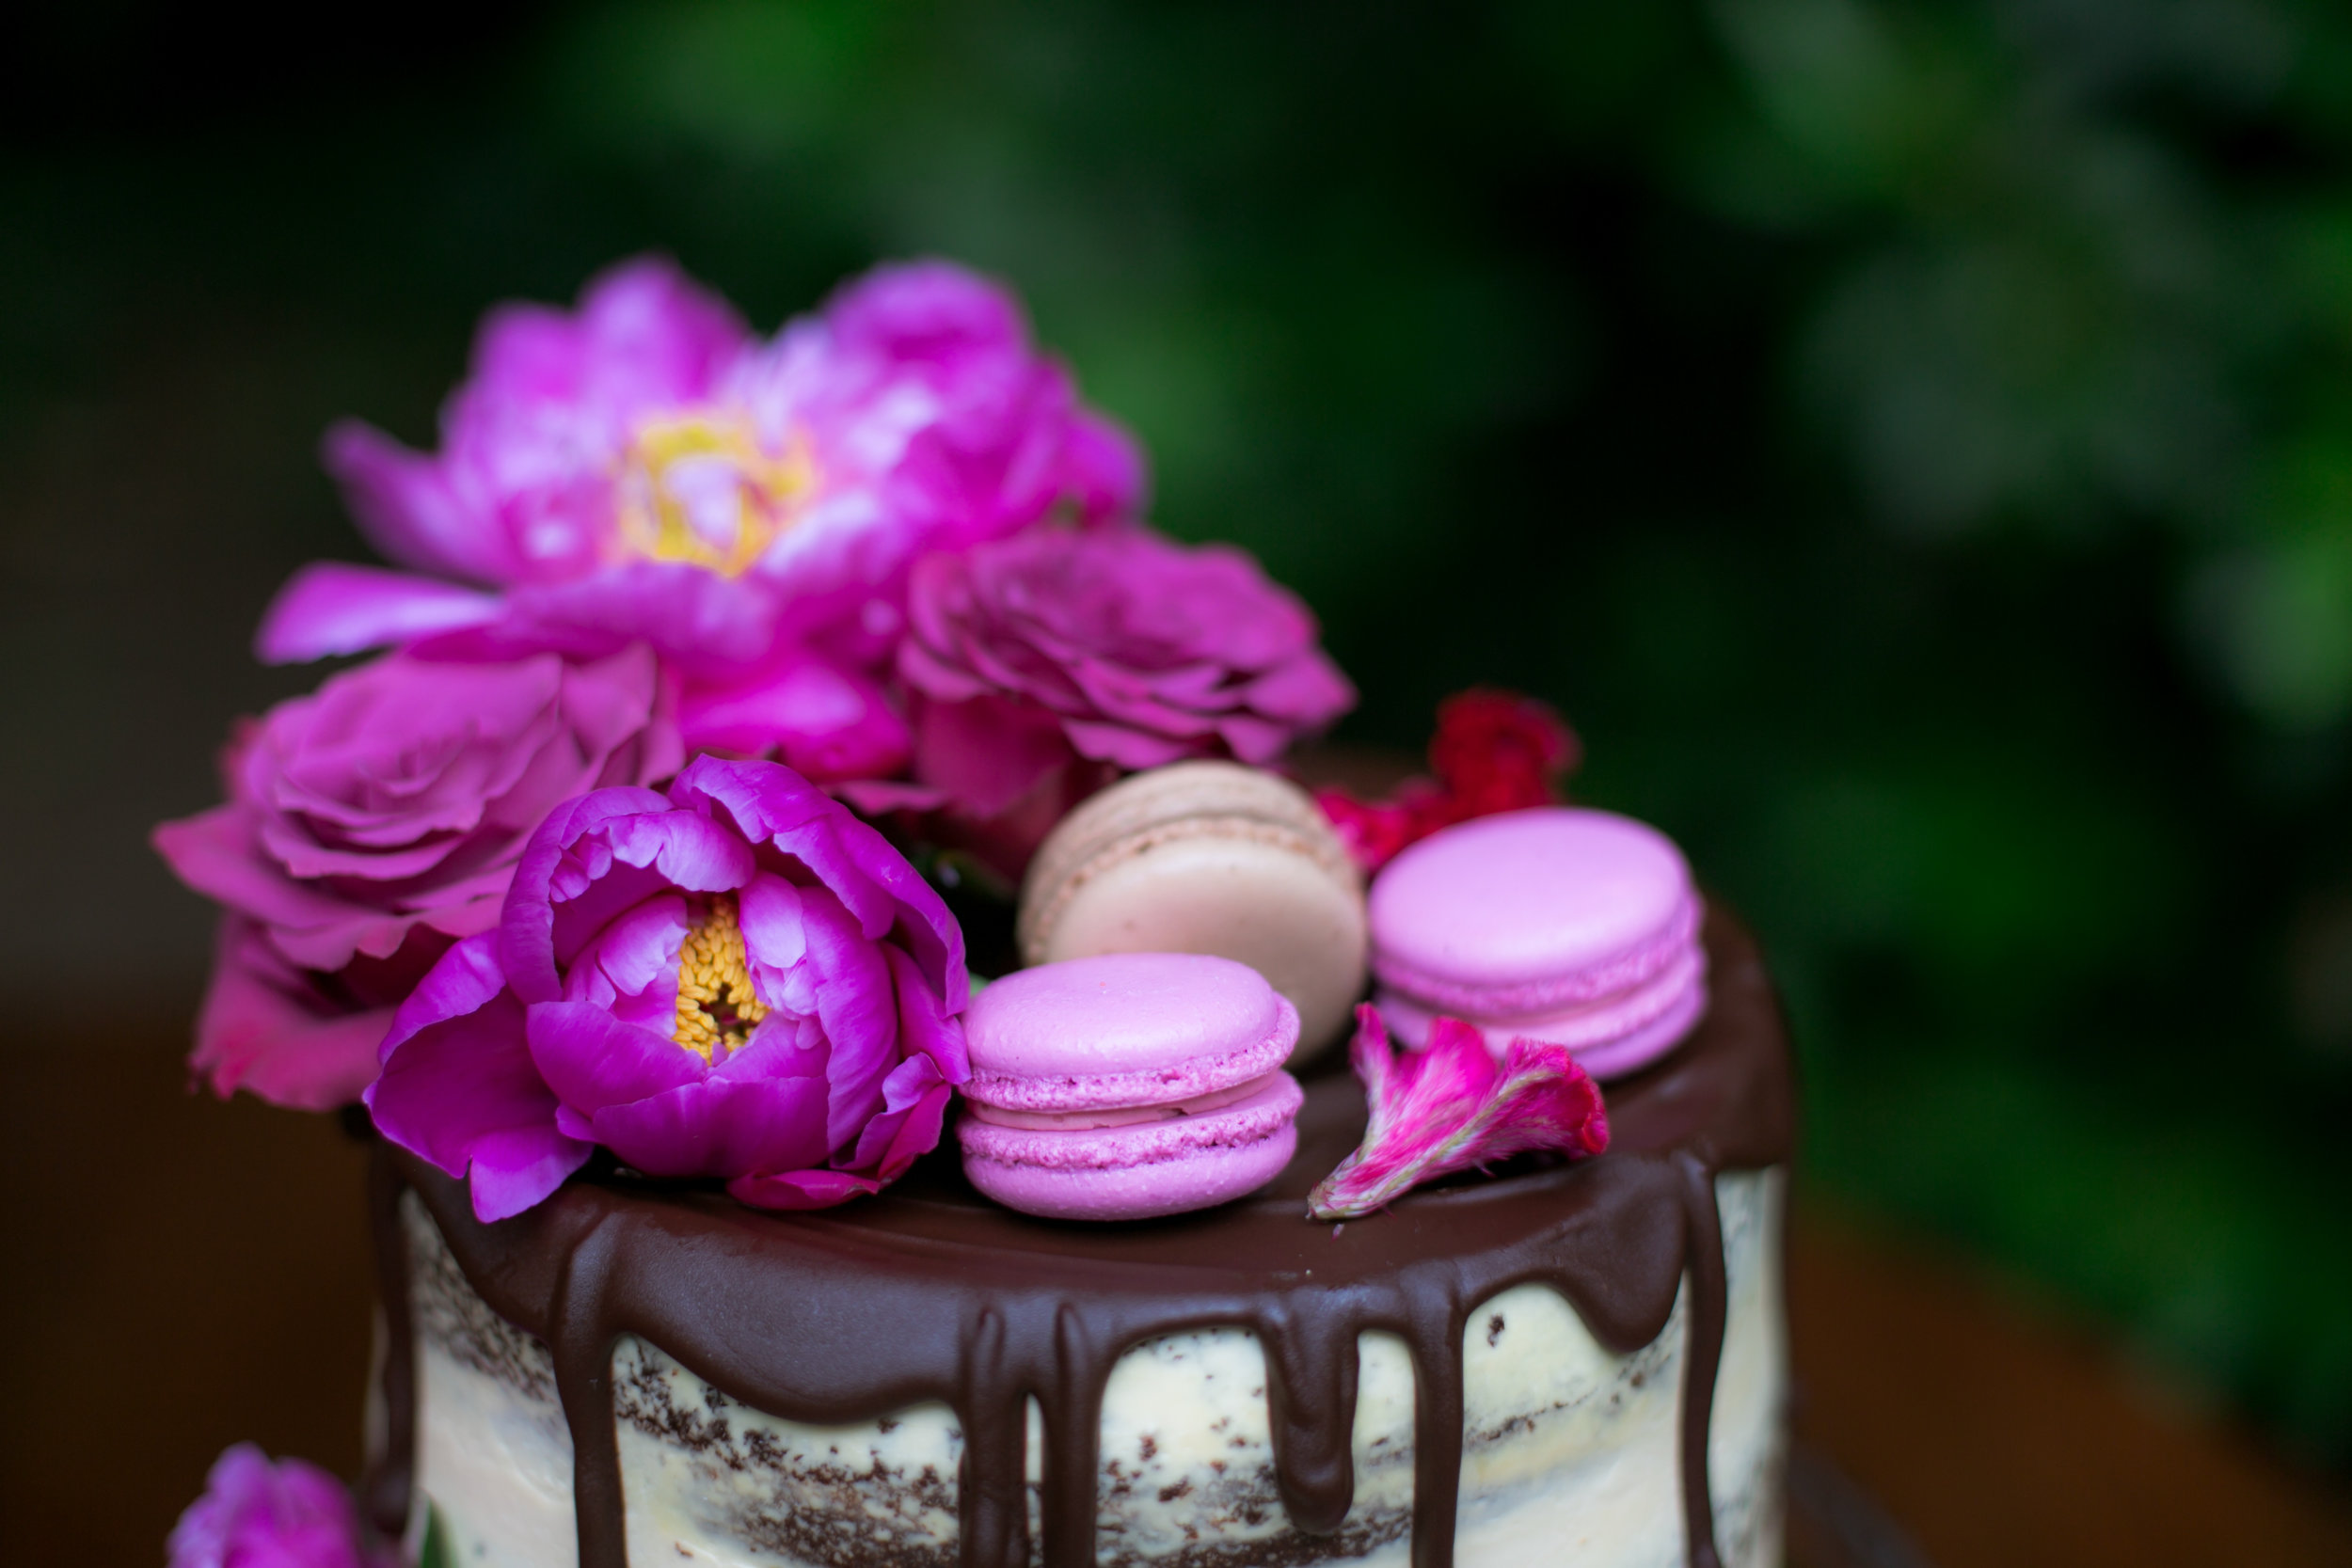 Chocolate Dripped Naked Wedding Cake with Macarons - Colchester, Connecticut Wedding Photographer